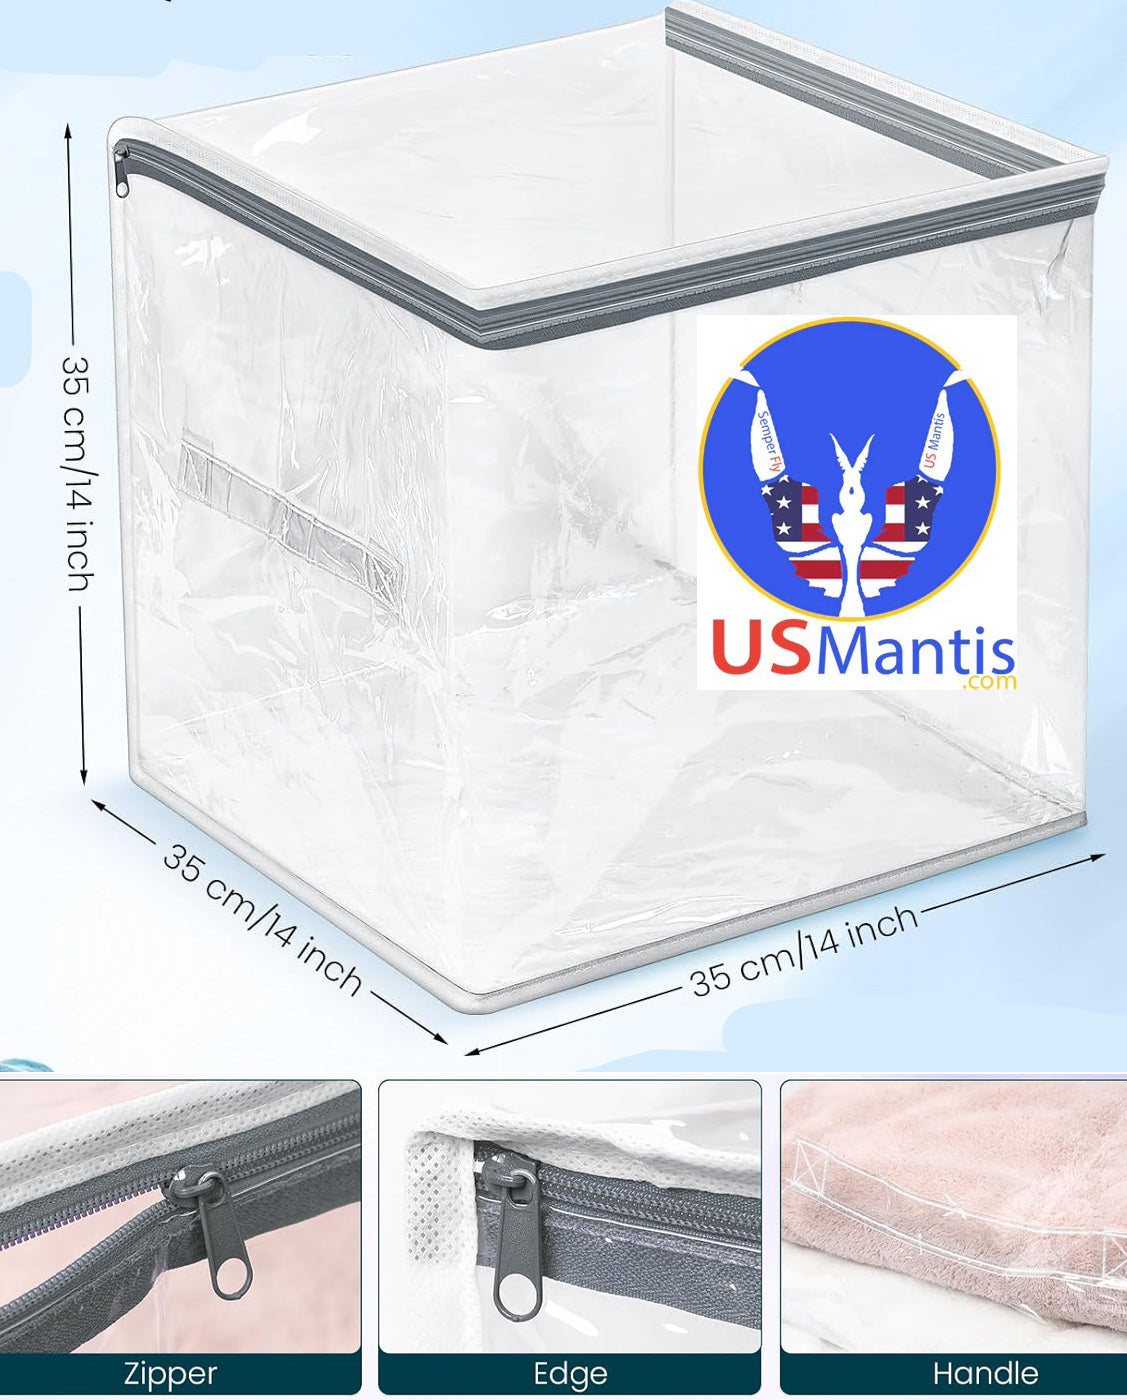 Net Cage Clear Cover Comfort Keeper With Zipper New product! - USMANTIS